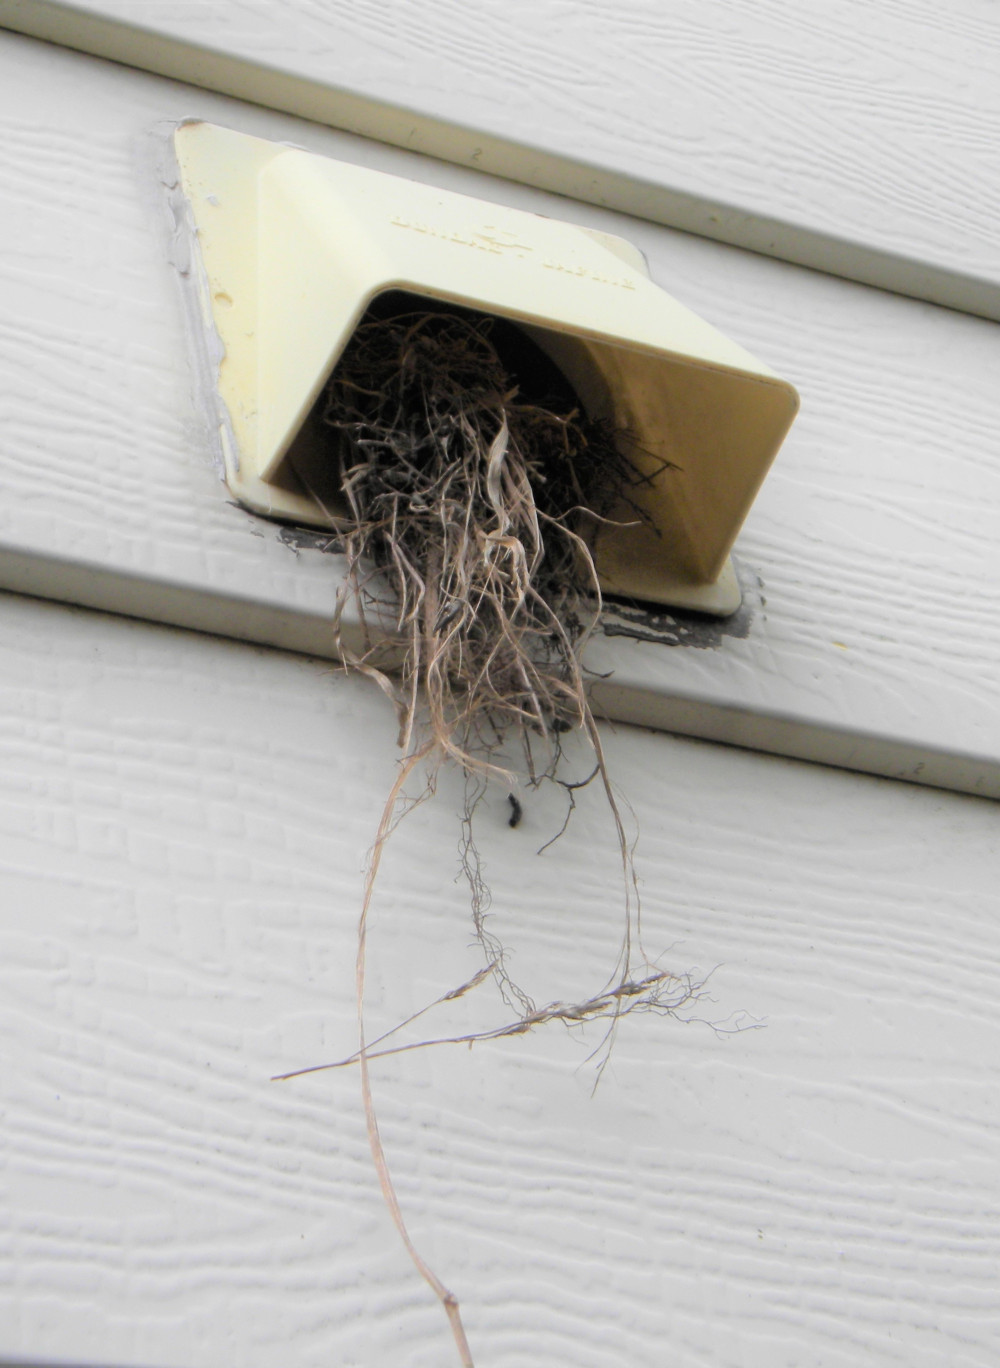 Dryer Vent Cleaning - Chimneyfix.com